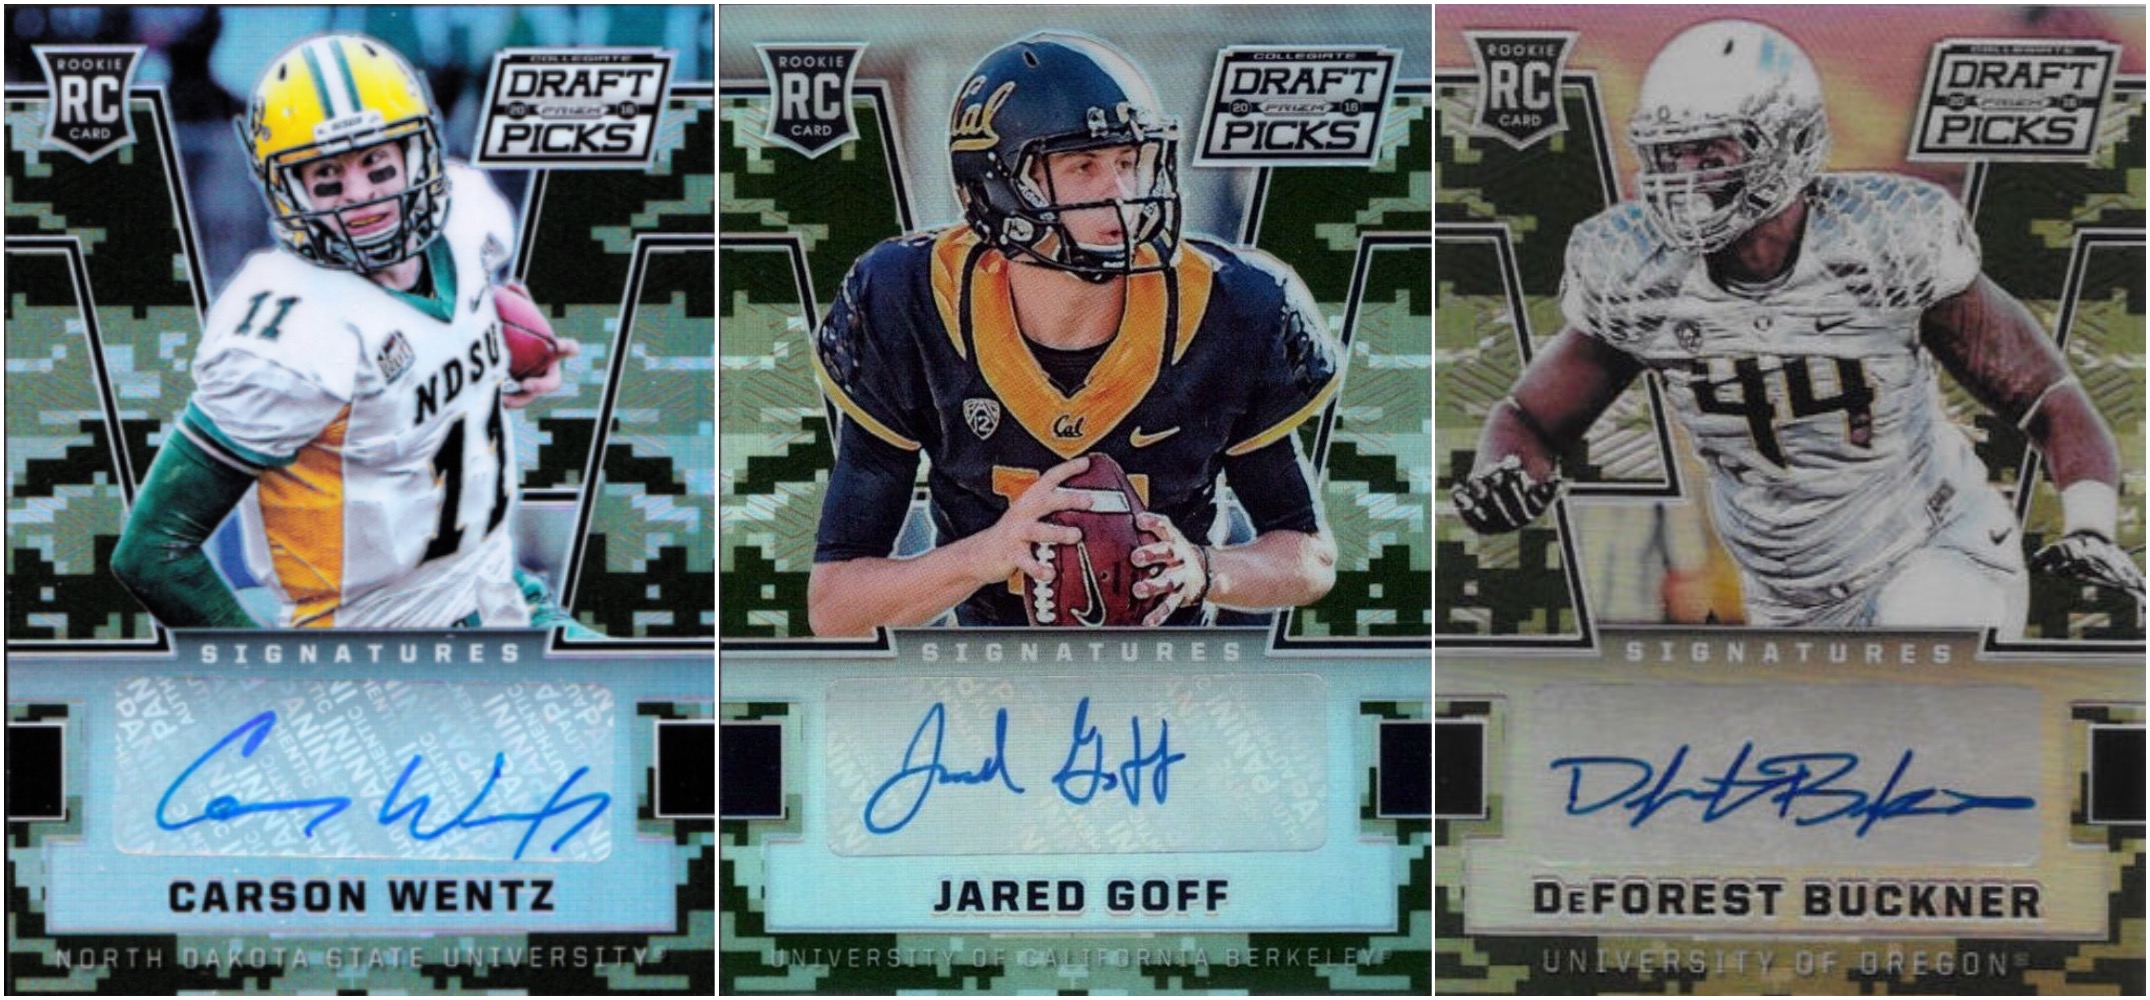 Image of three sports trading cards: Carson Wentz, Jared Goff, and DeForest Buckner